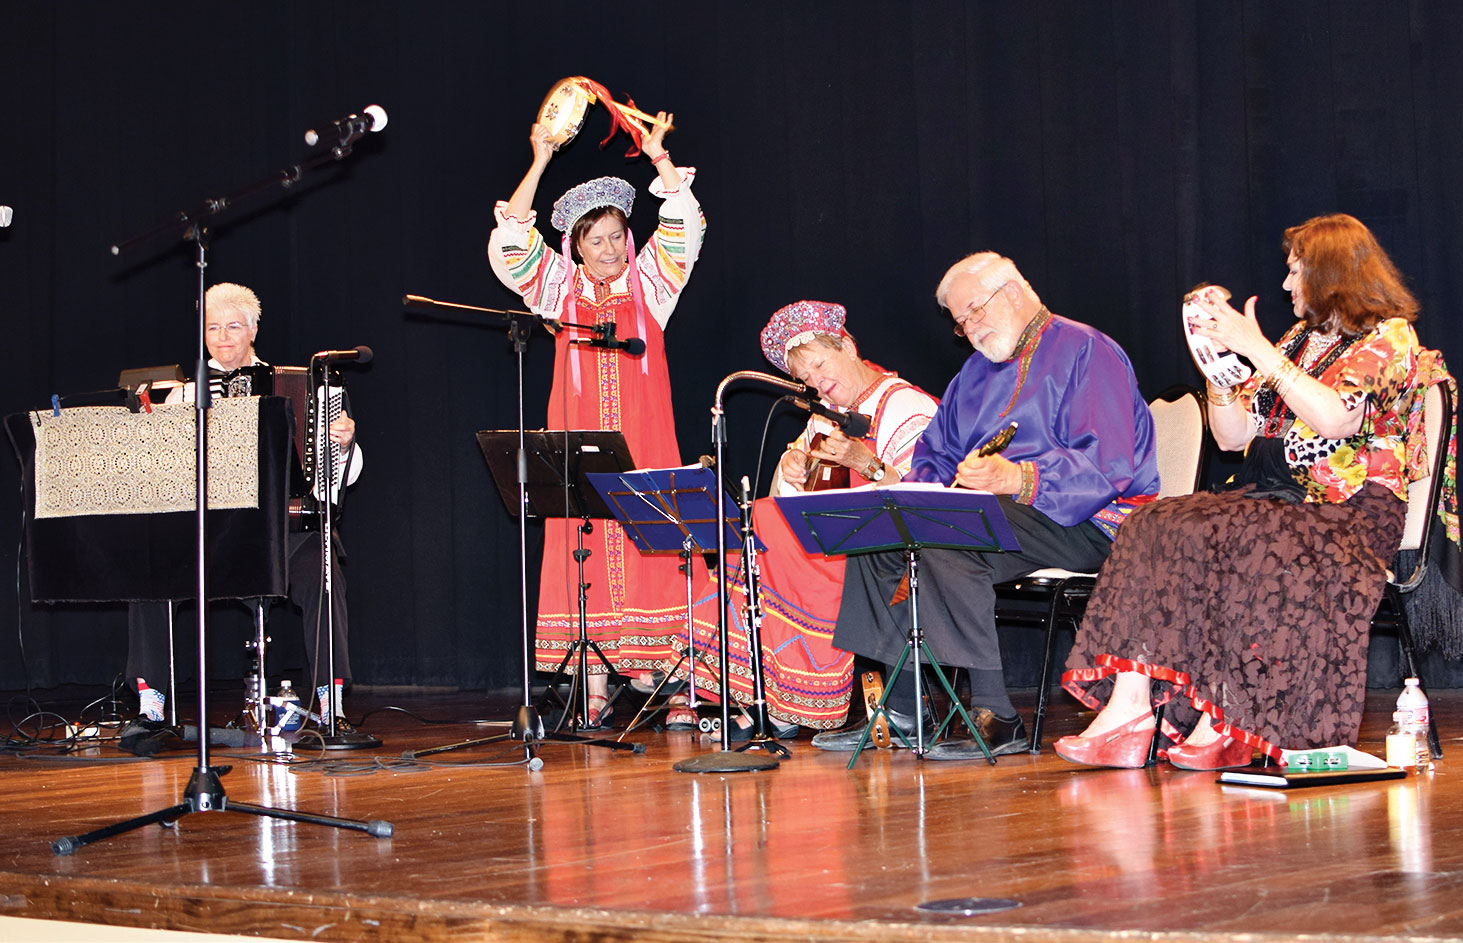 Members of the Arizona Balalaika Orchestra joyfully performing for TWOQC; photo by Eileen Sykora